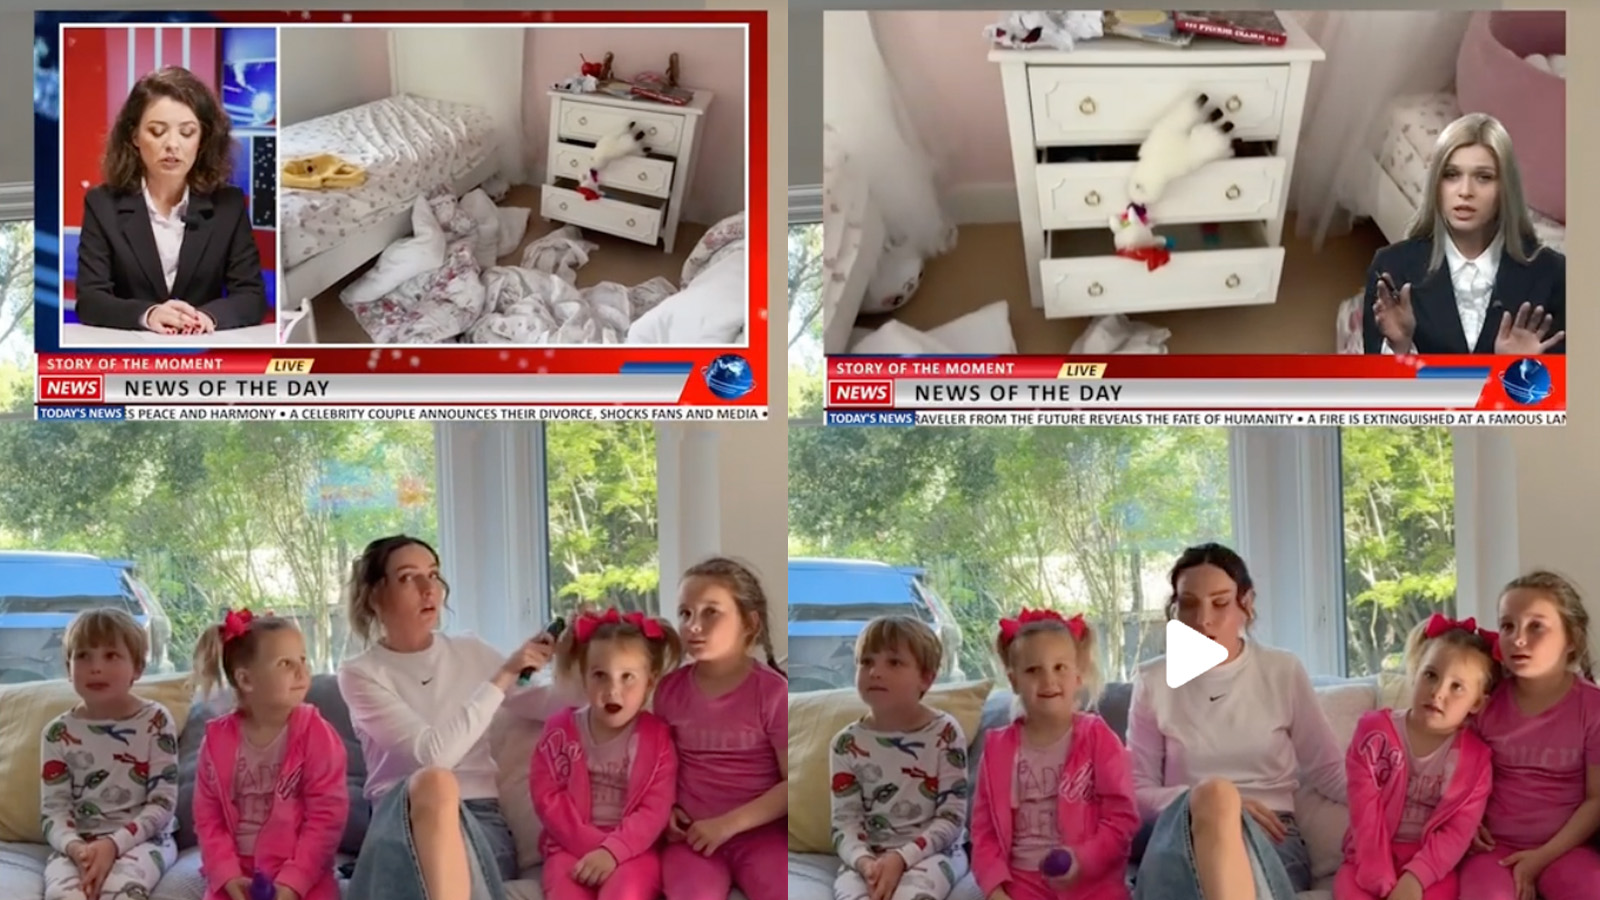 Parents go viral making fake news reports to trick kids into cleaning their rooms